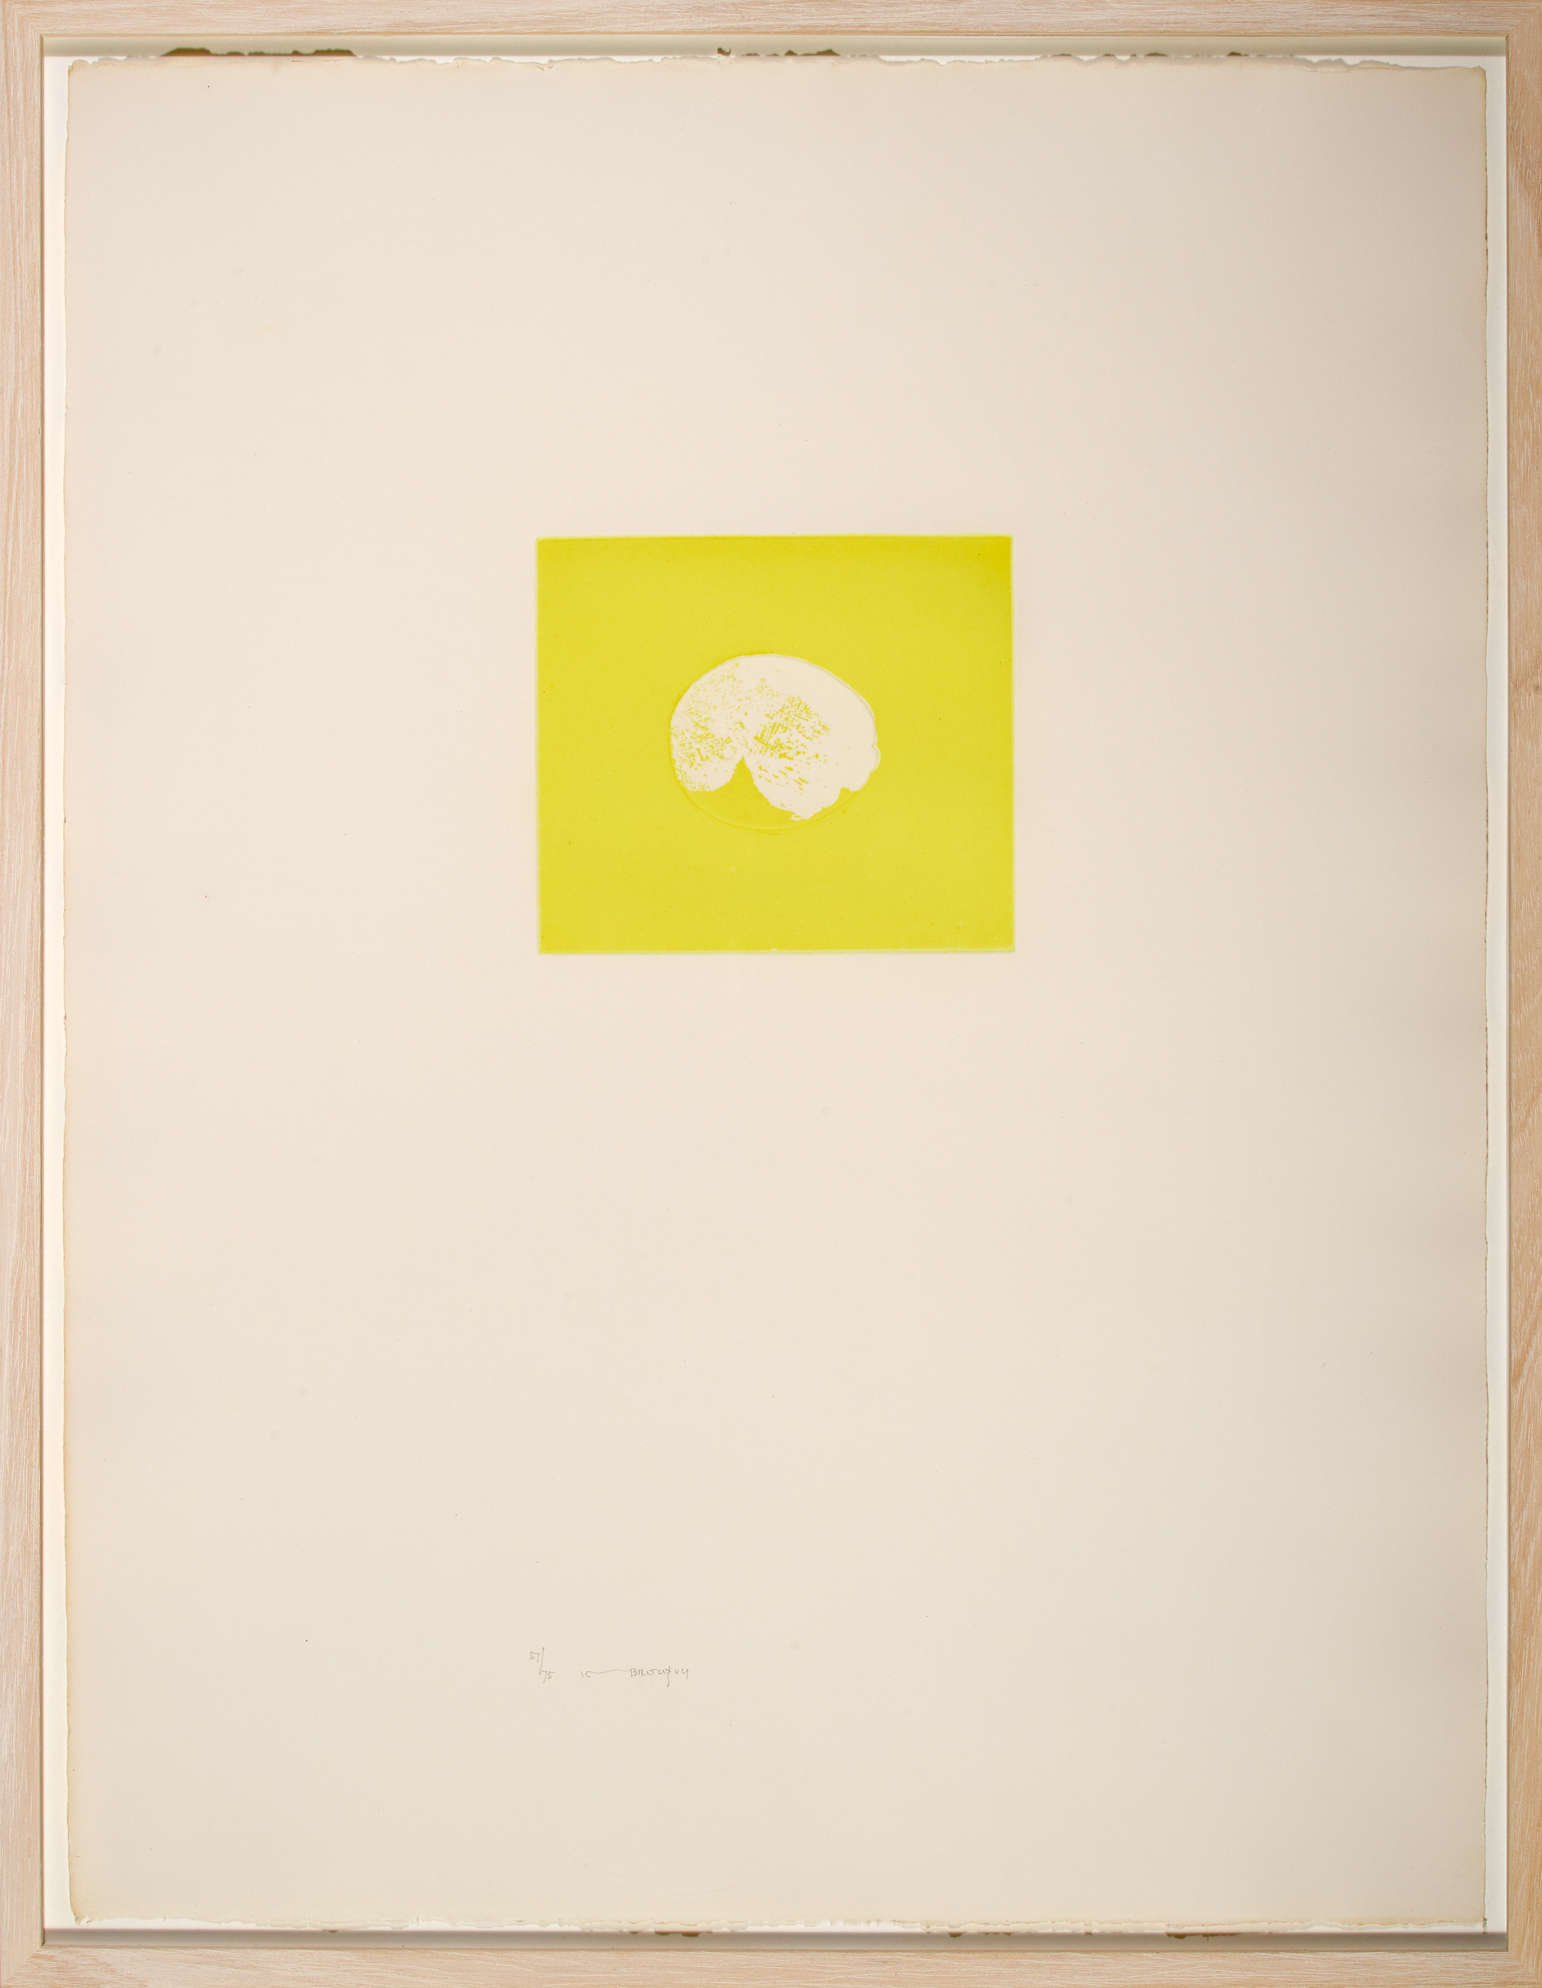 Louis le Brocquy HRHA (1916-2012) NO LEMON, 1974 Intaglio print on paper; (no. 57 from an edition of - Image 2 of 4